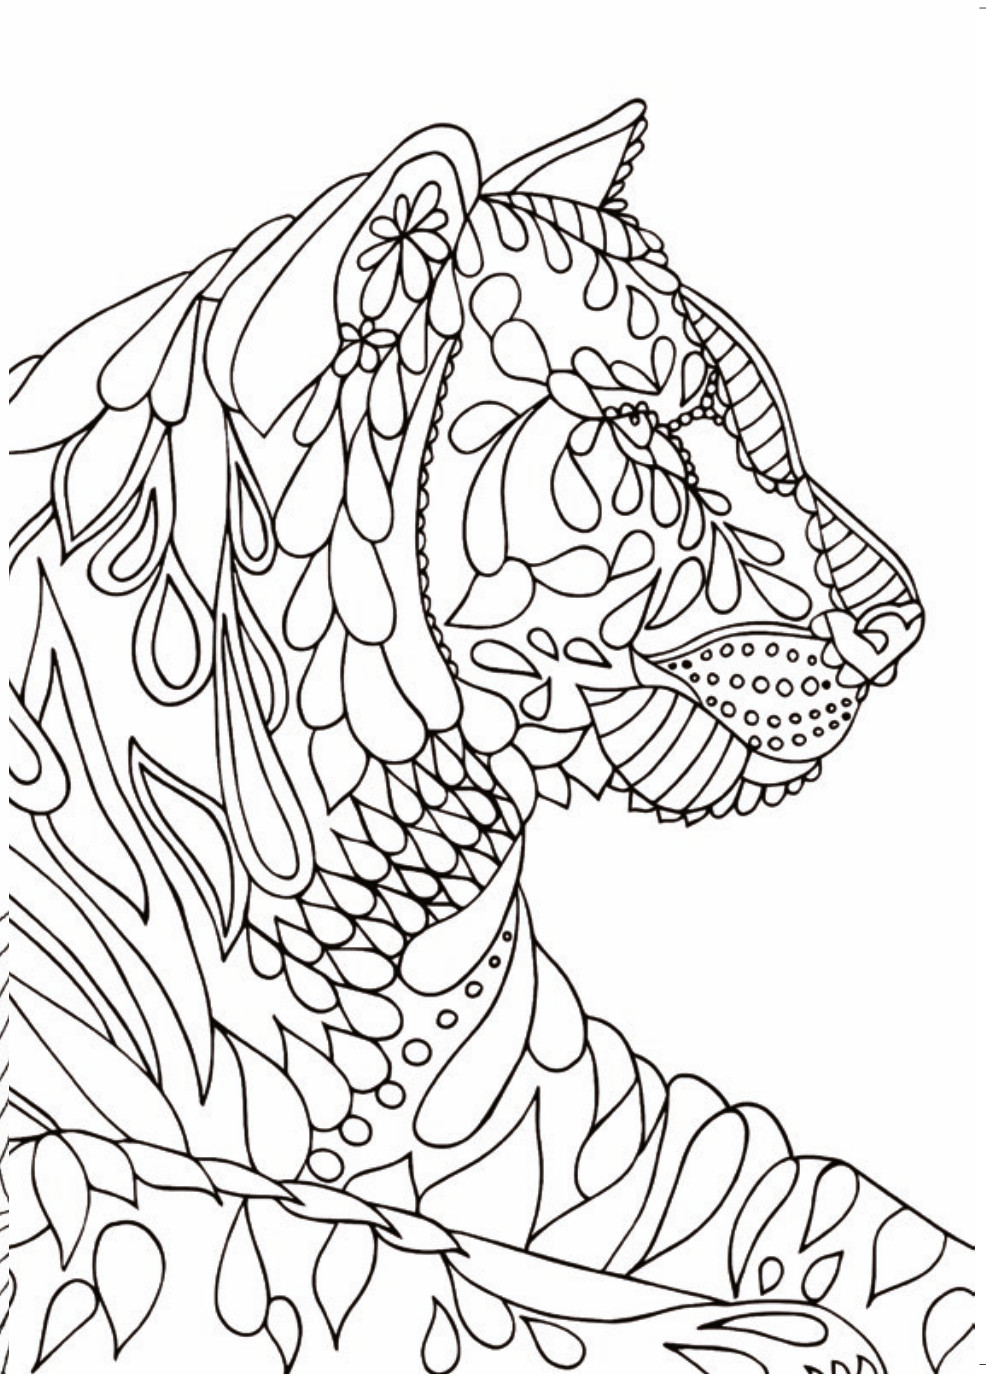 Mindfulness Coloring Pages For Kids
 printable mindfulness colouring screen shot 2016 12 24 at